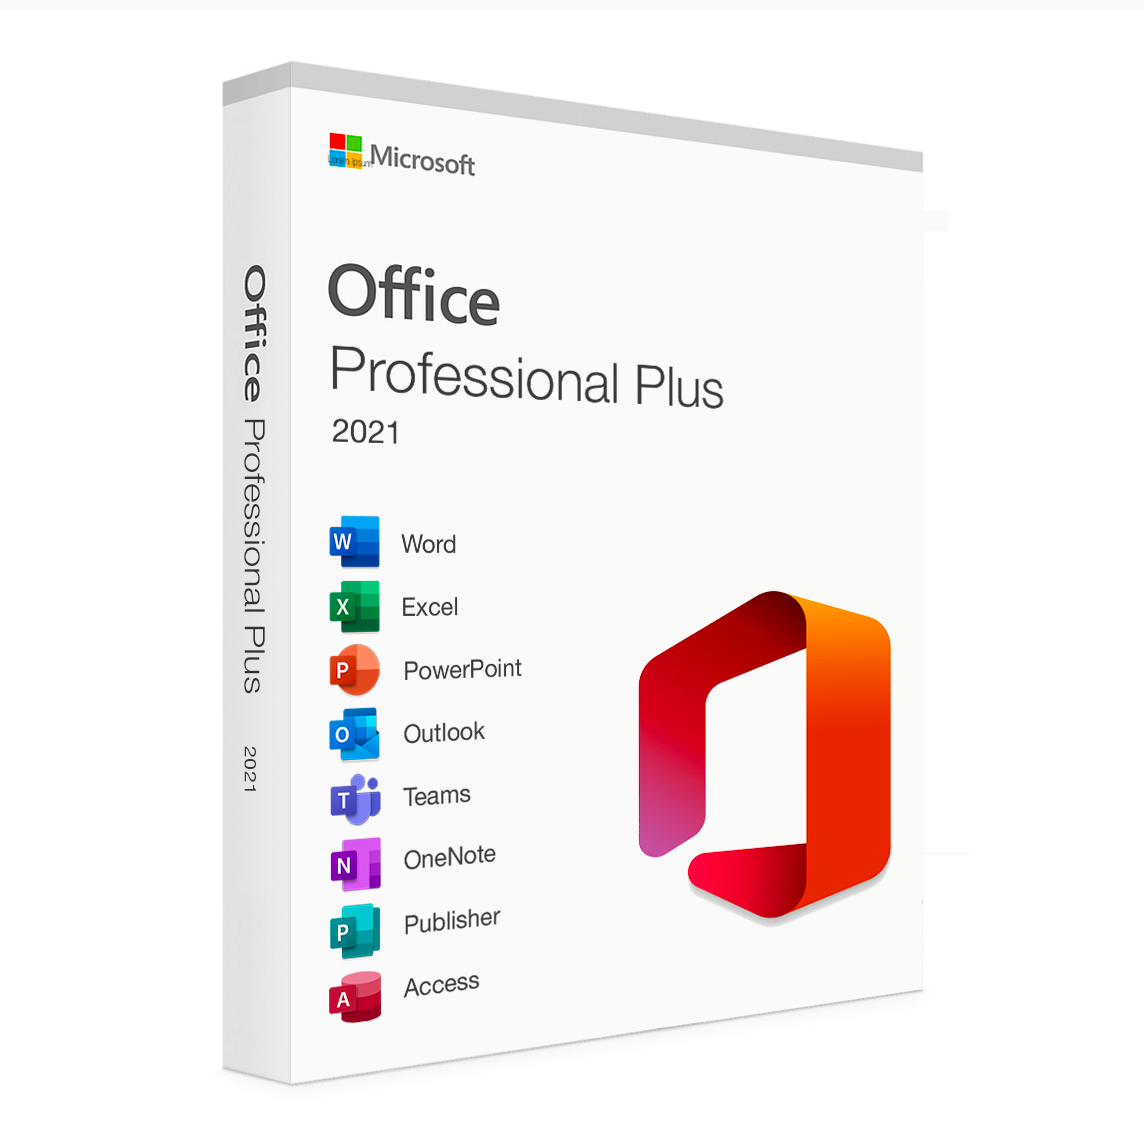 Office pro plus will apple give me a new macbook